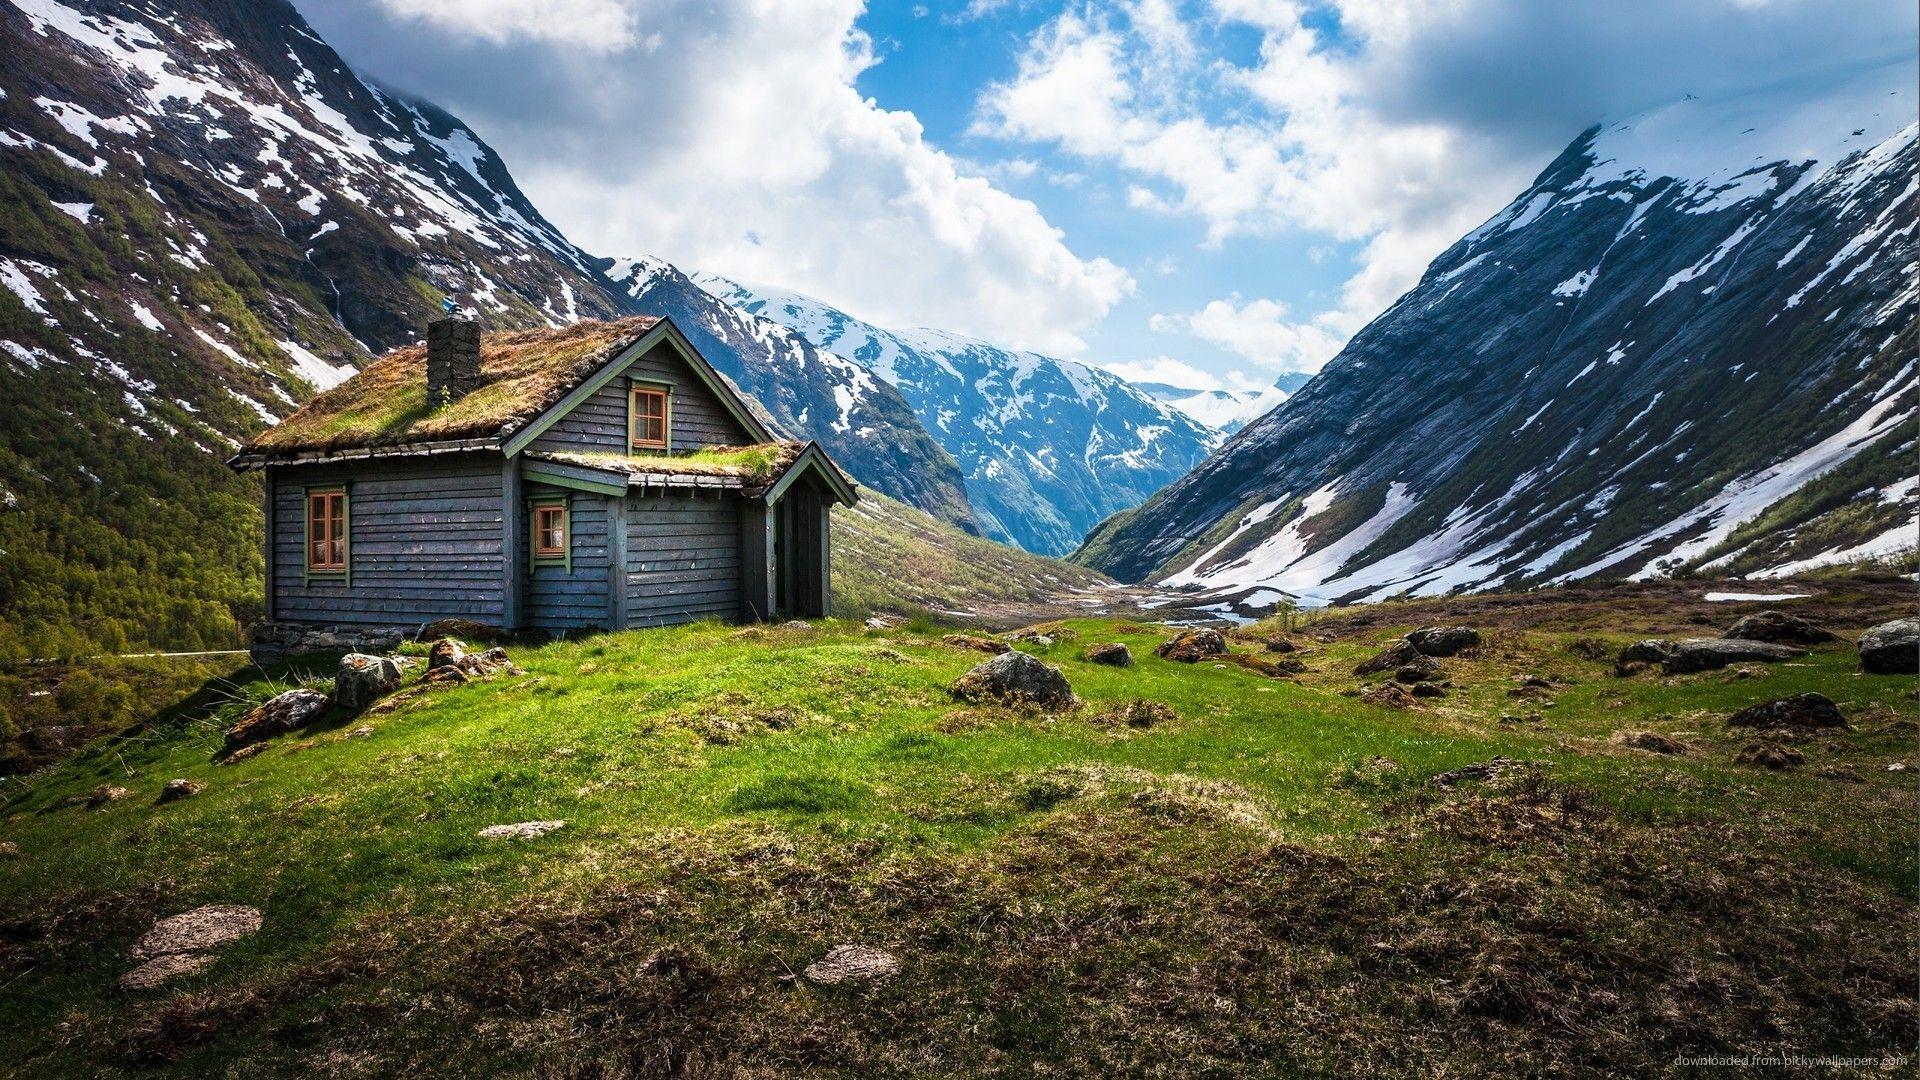 Download 1920x1080 Lone House In Norway Wallpaper